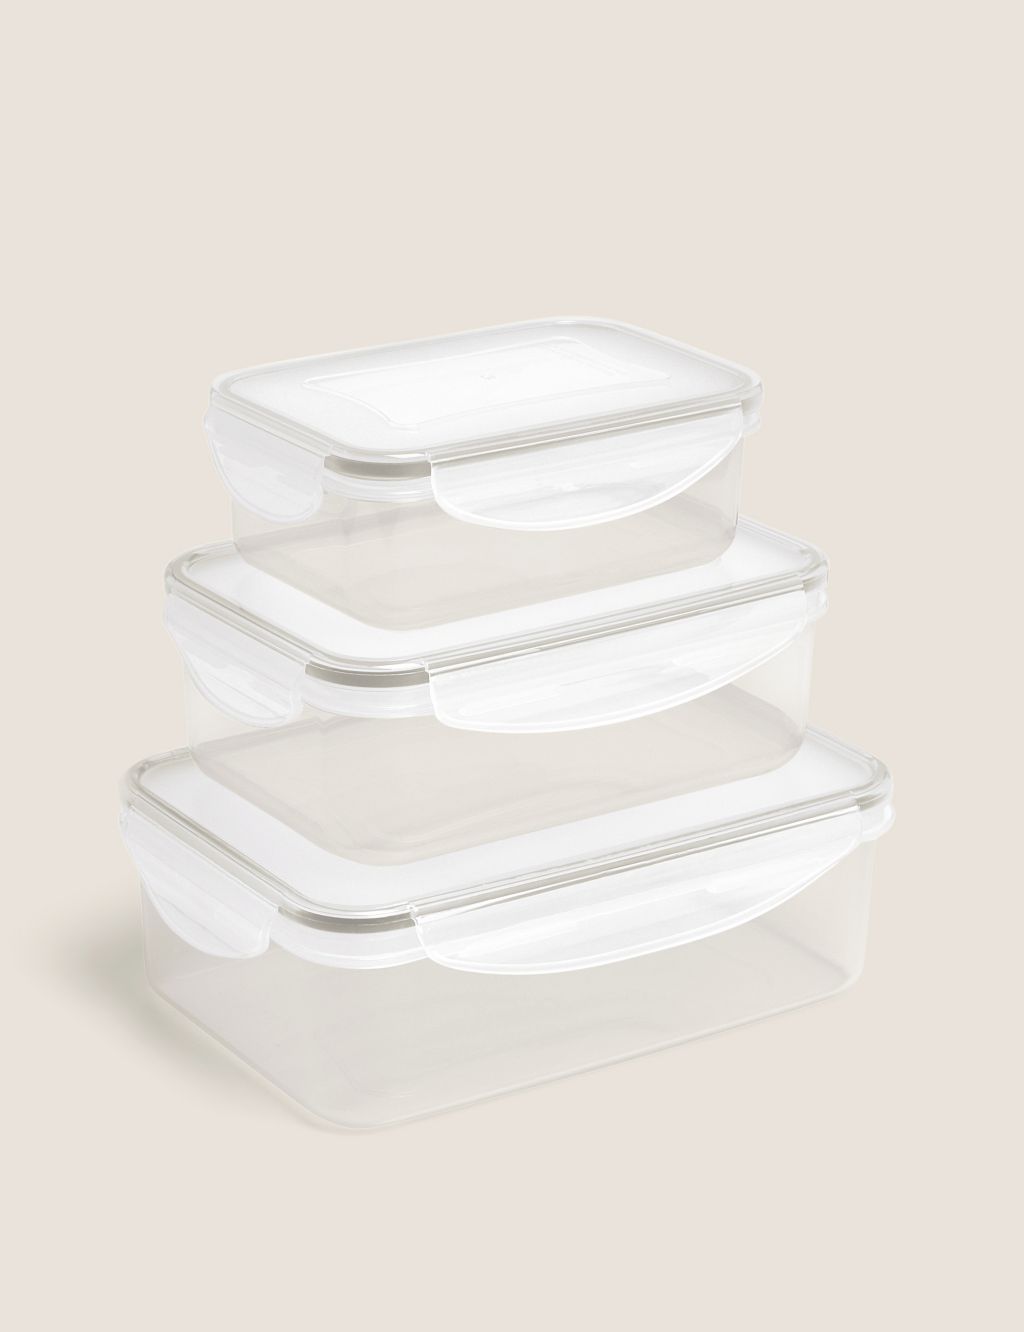 Set of 3 Food Storage Containers image 1